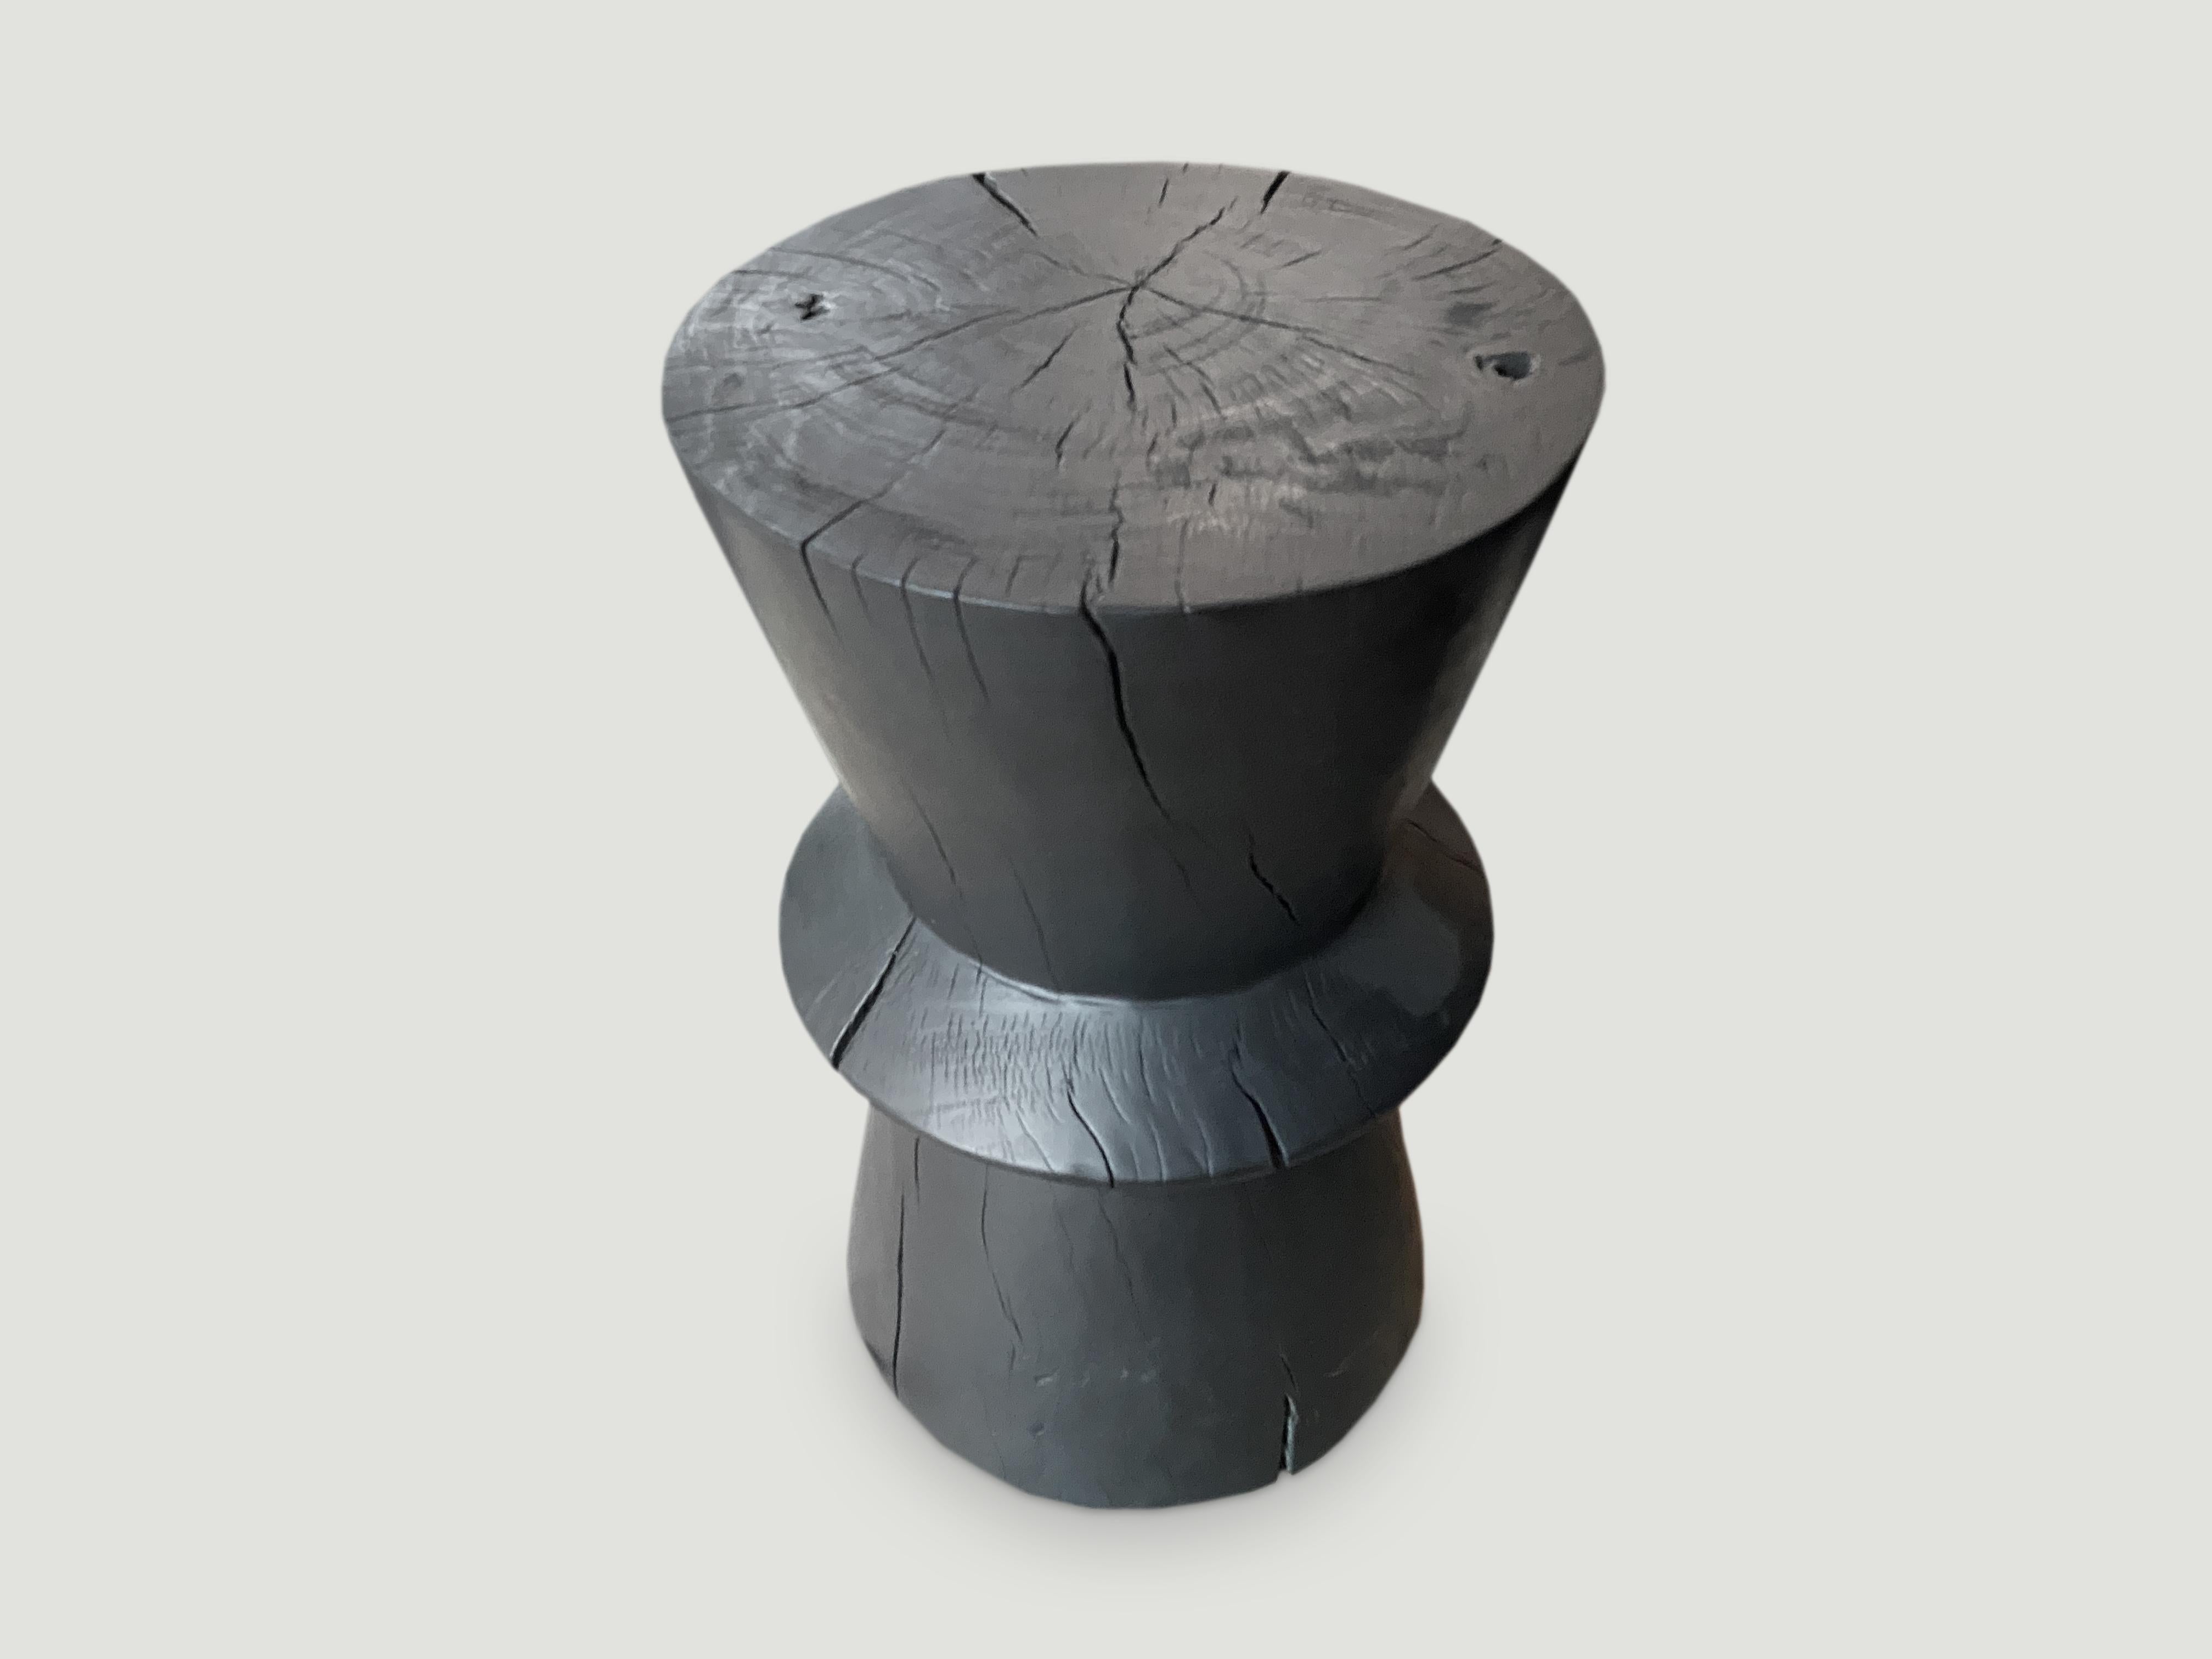 Hand carved side table that celebrates cracks and crevices found in reclaimed tamarind wood. We have a collection. The price and size reflect the one shown.

The Triple Burnt collection represents a unique line of modern furniture made from solid